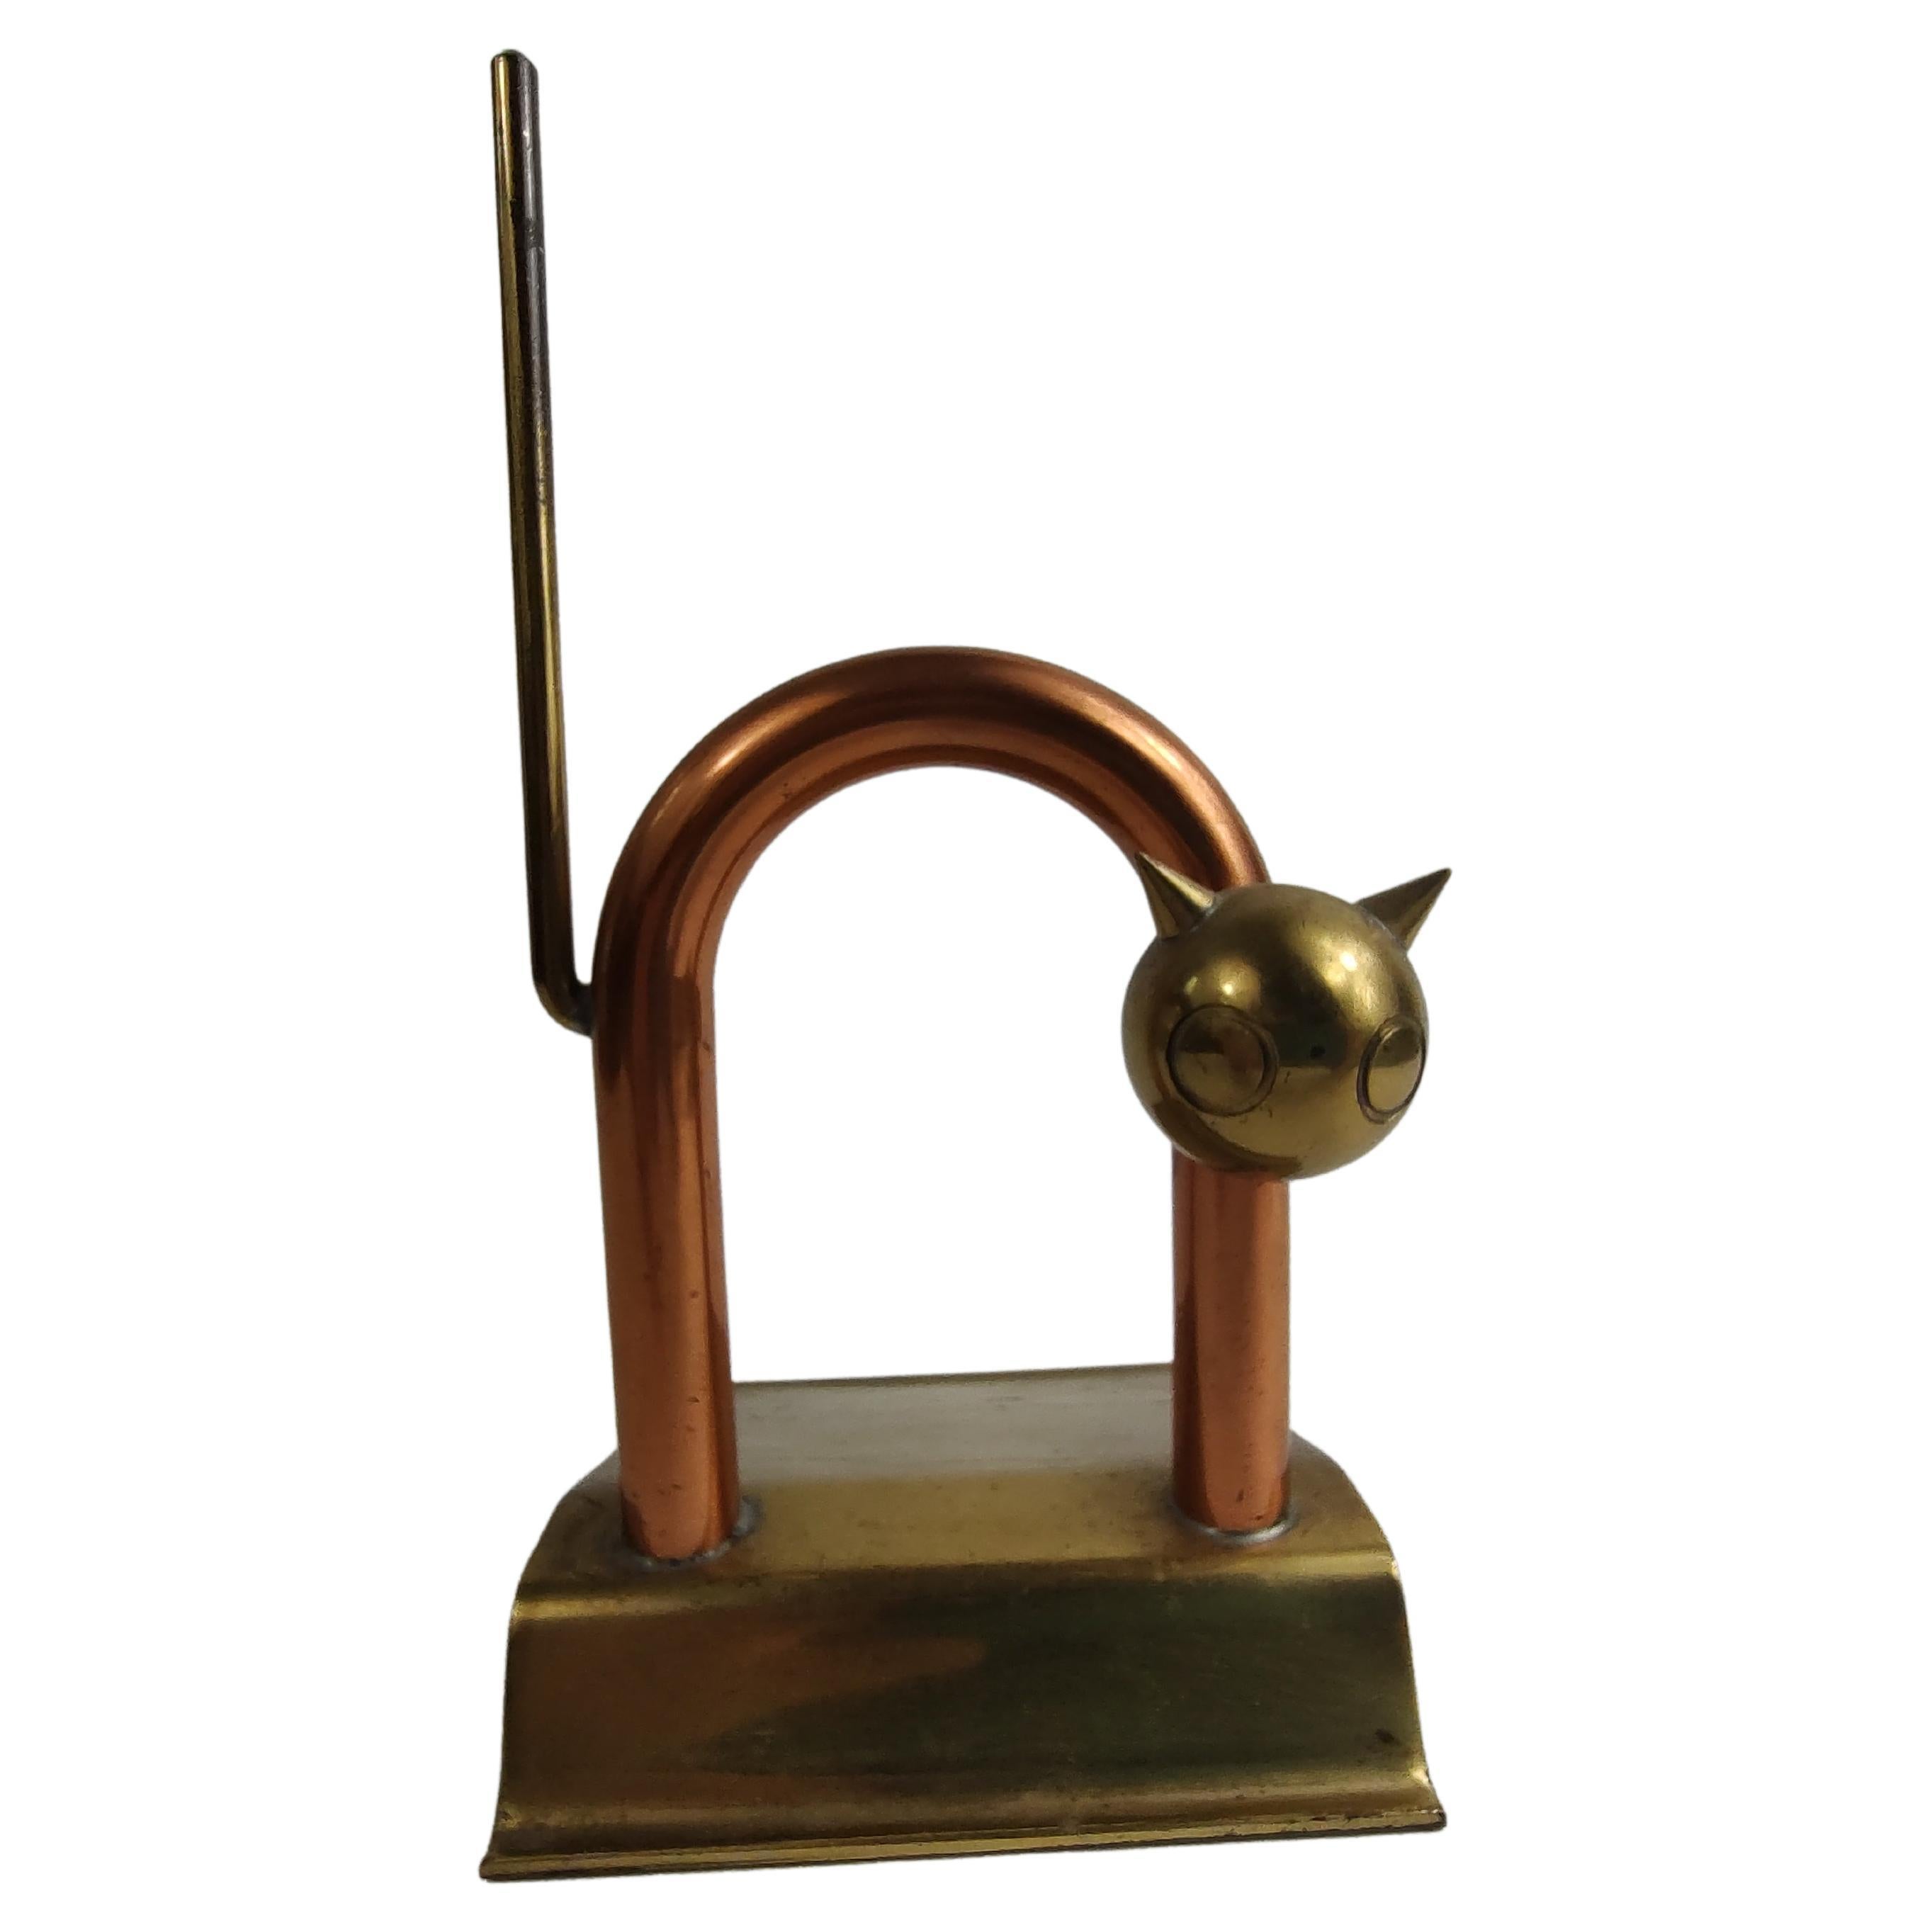 Fabulous simple yet elegant design by Walter Von Neesen for Chase circa 1935. Brass & copper stylized in the form of a arching cat. Rare find. In excellent vintage condition with minimal wear.